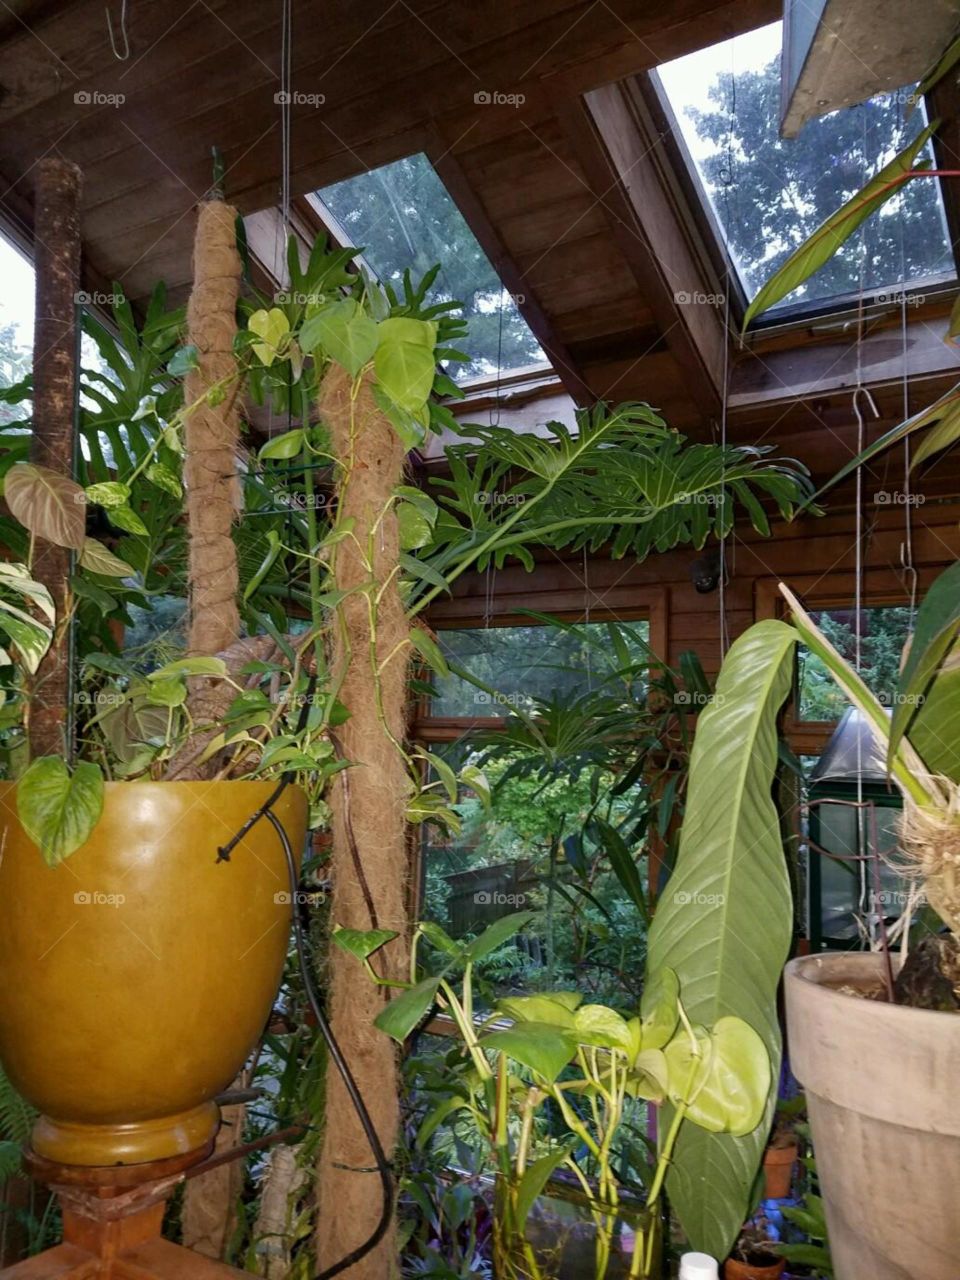 Jungle plant sunroom indoors. Skylights, fans blowing, climbing plants, skylights, orchids etc.